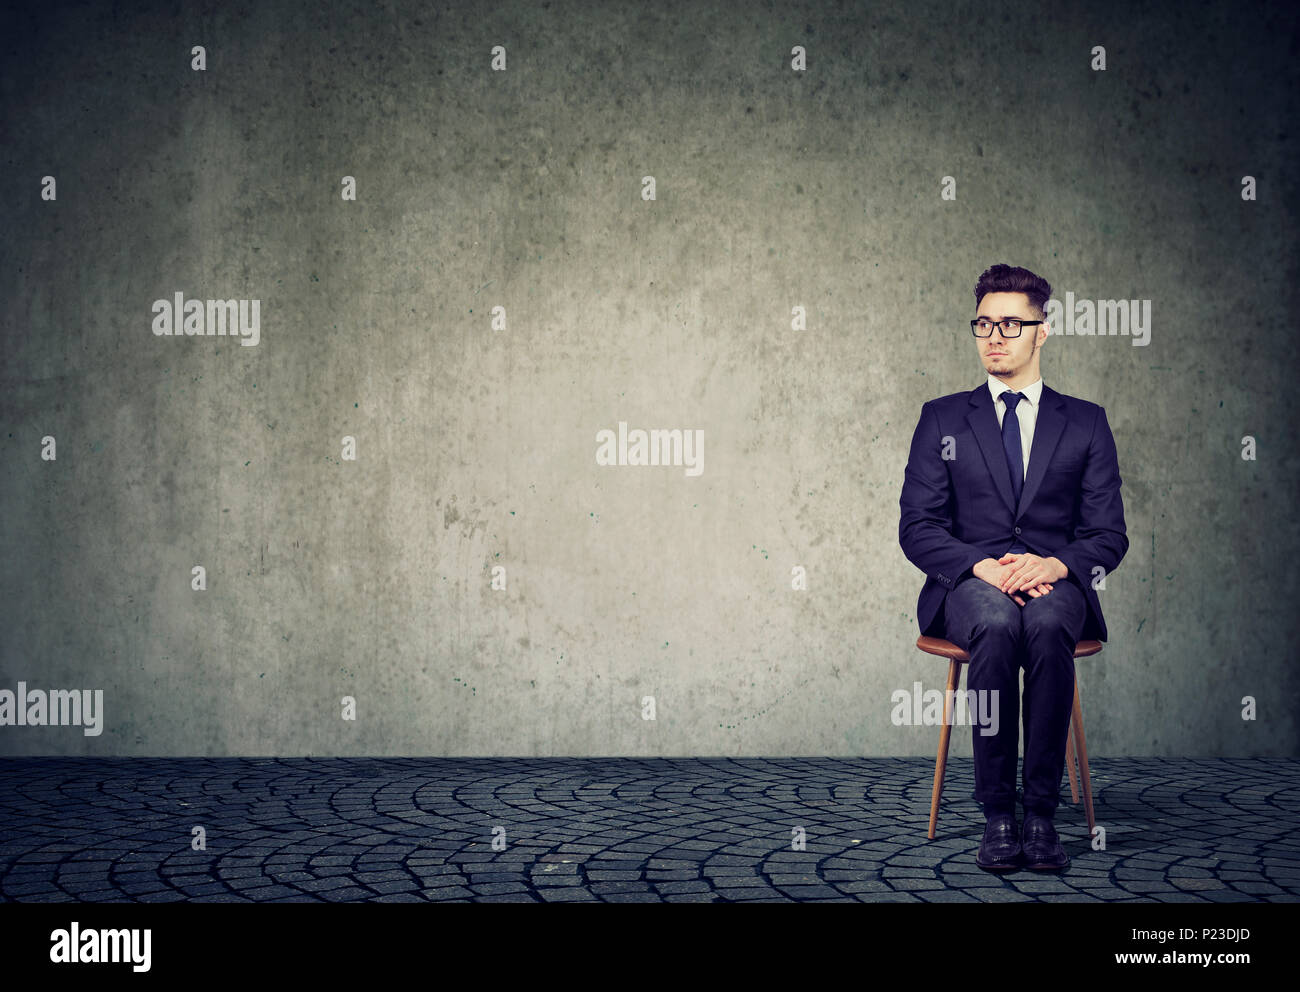 Nervous young man in suit sitting on chair expecting interview session in anxiety. Stock Photo